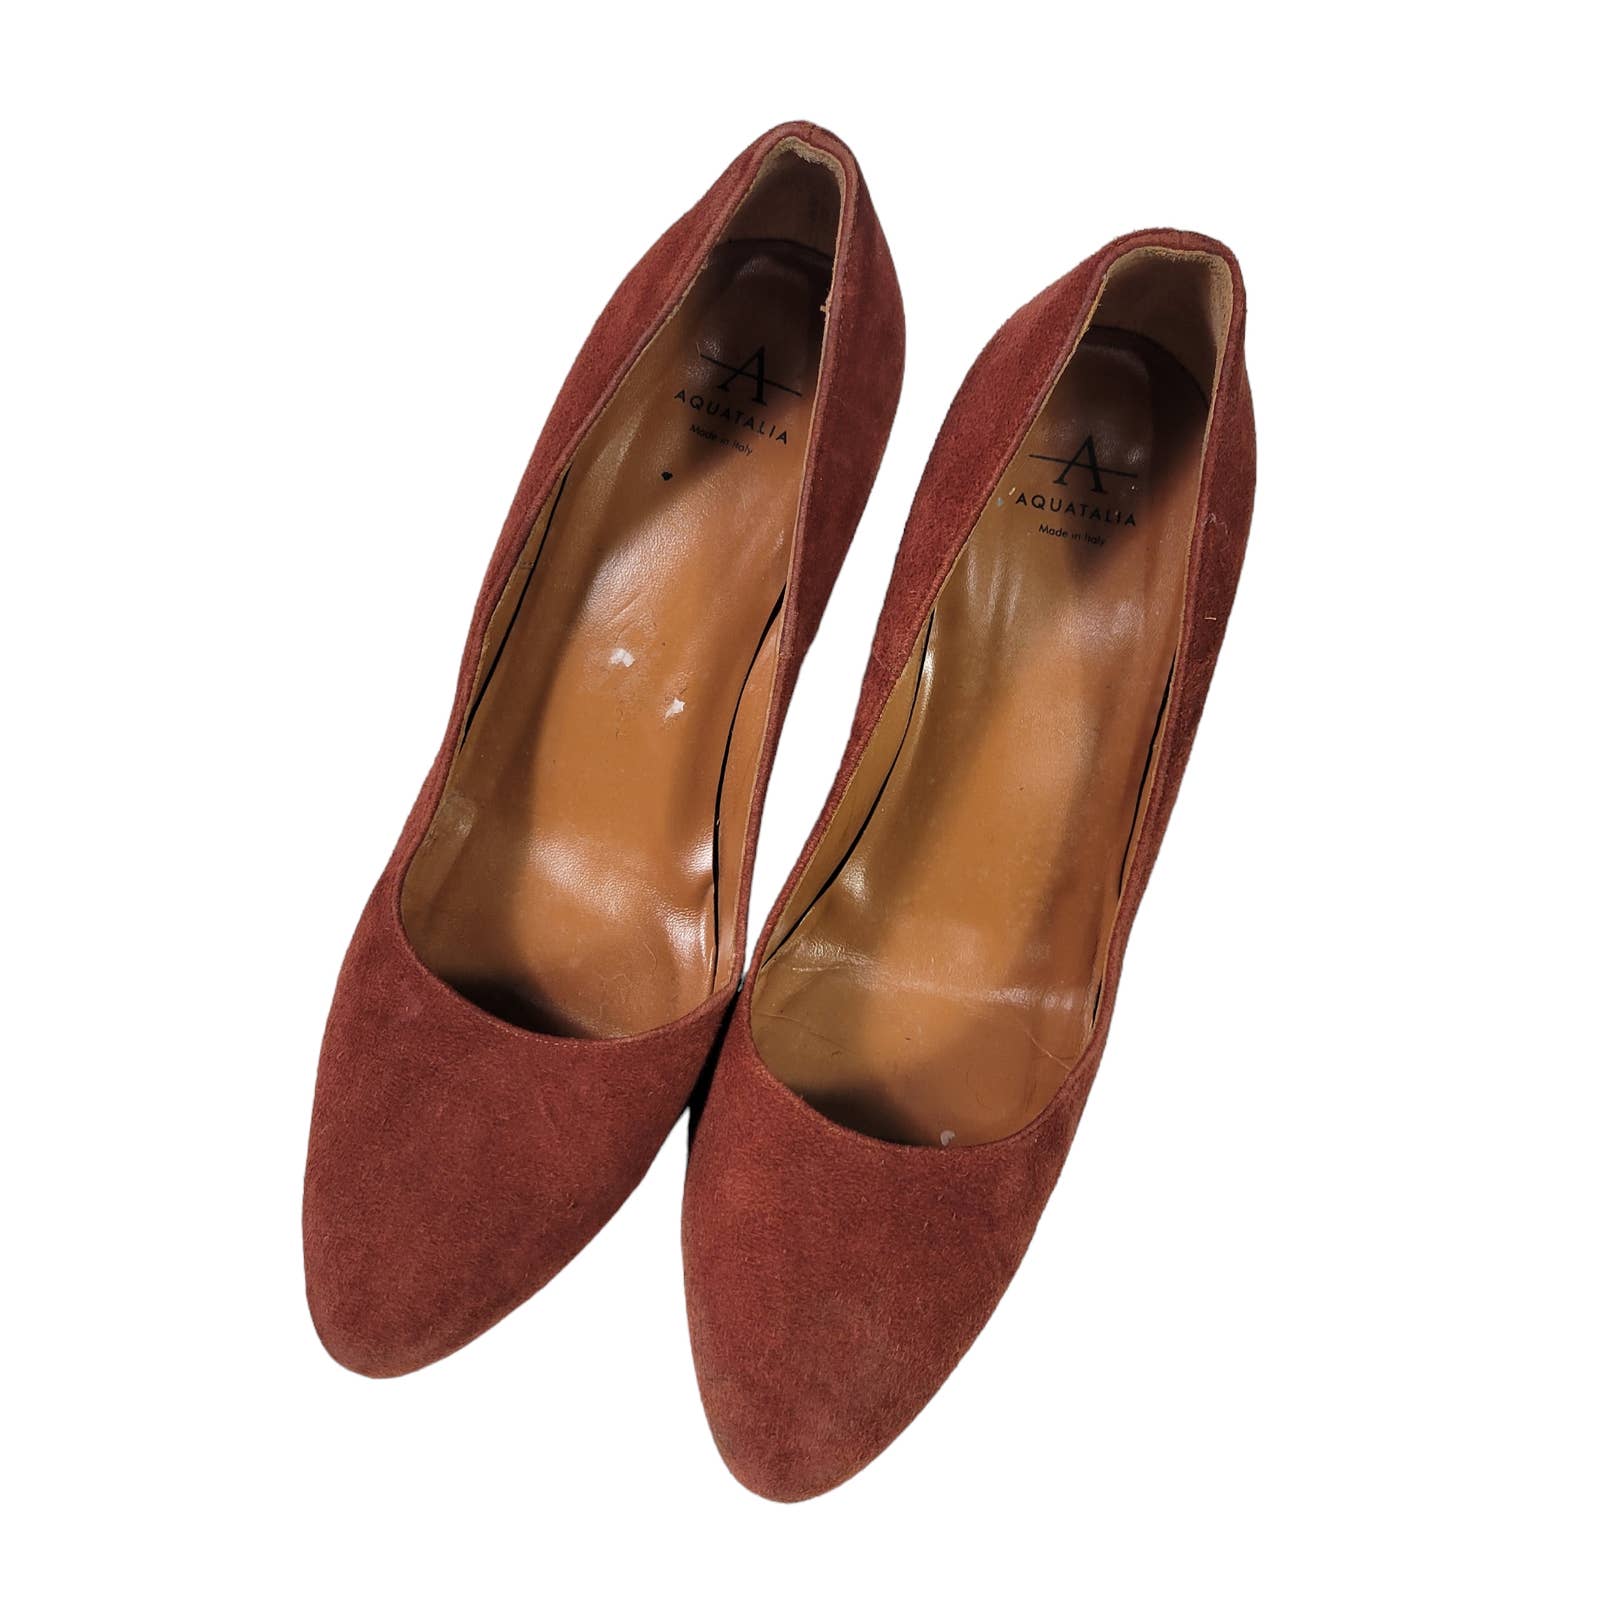 Aquatalia Neely Suede Heels Brown Leather Block Almond Semi Pointed Toe Italy Size 7